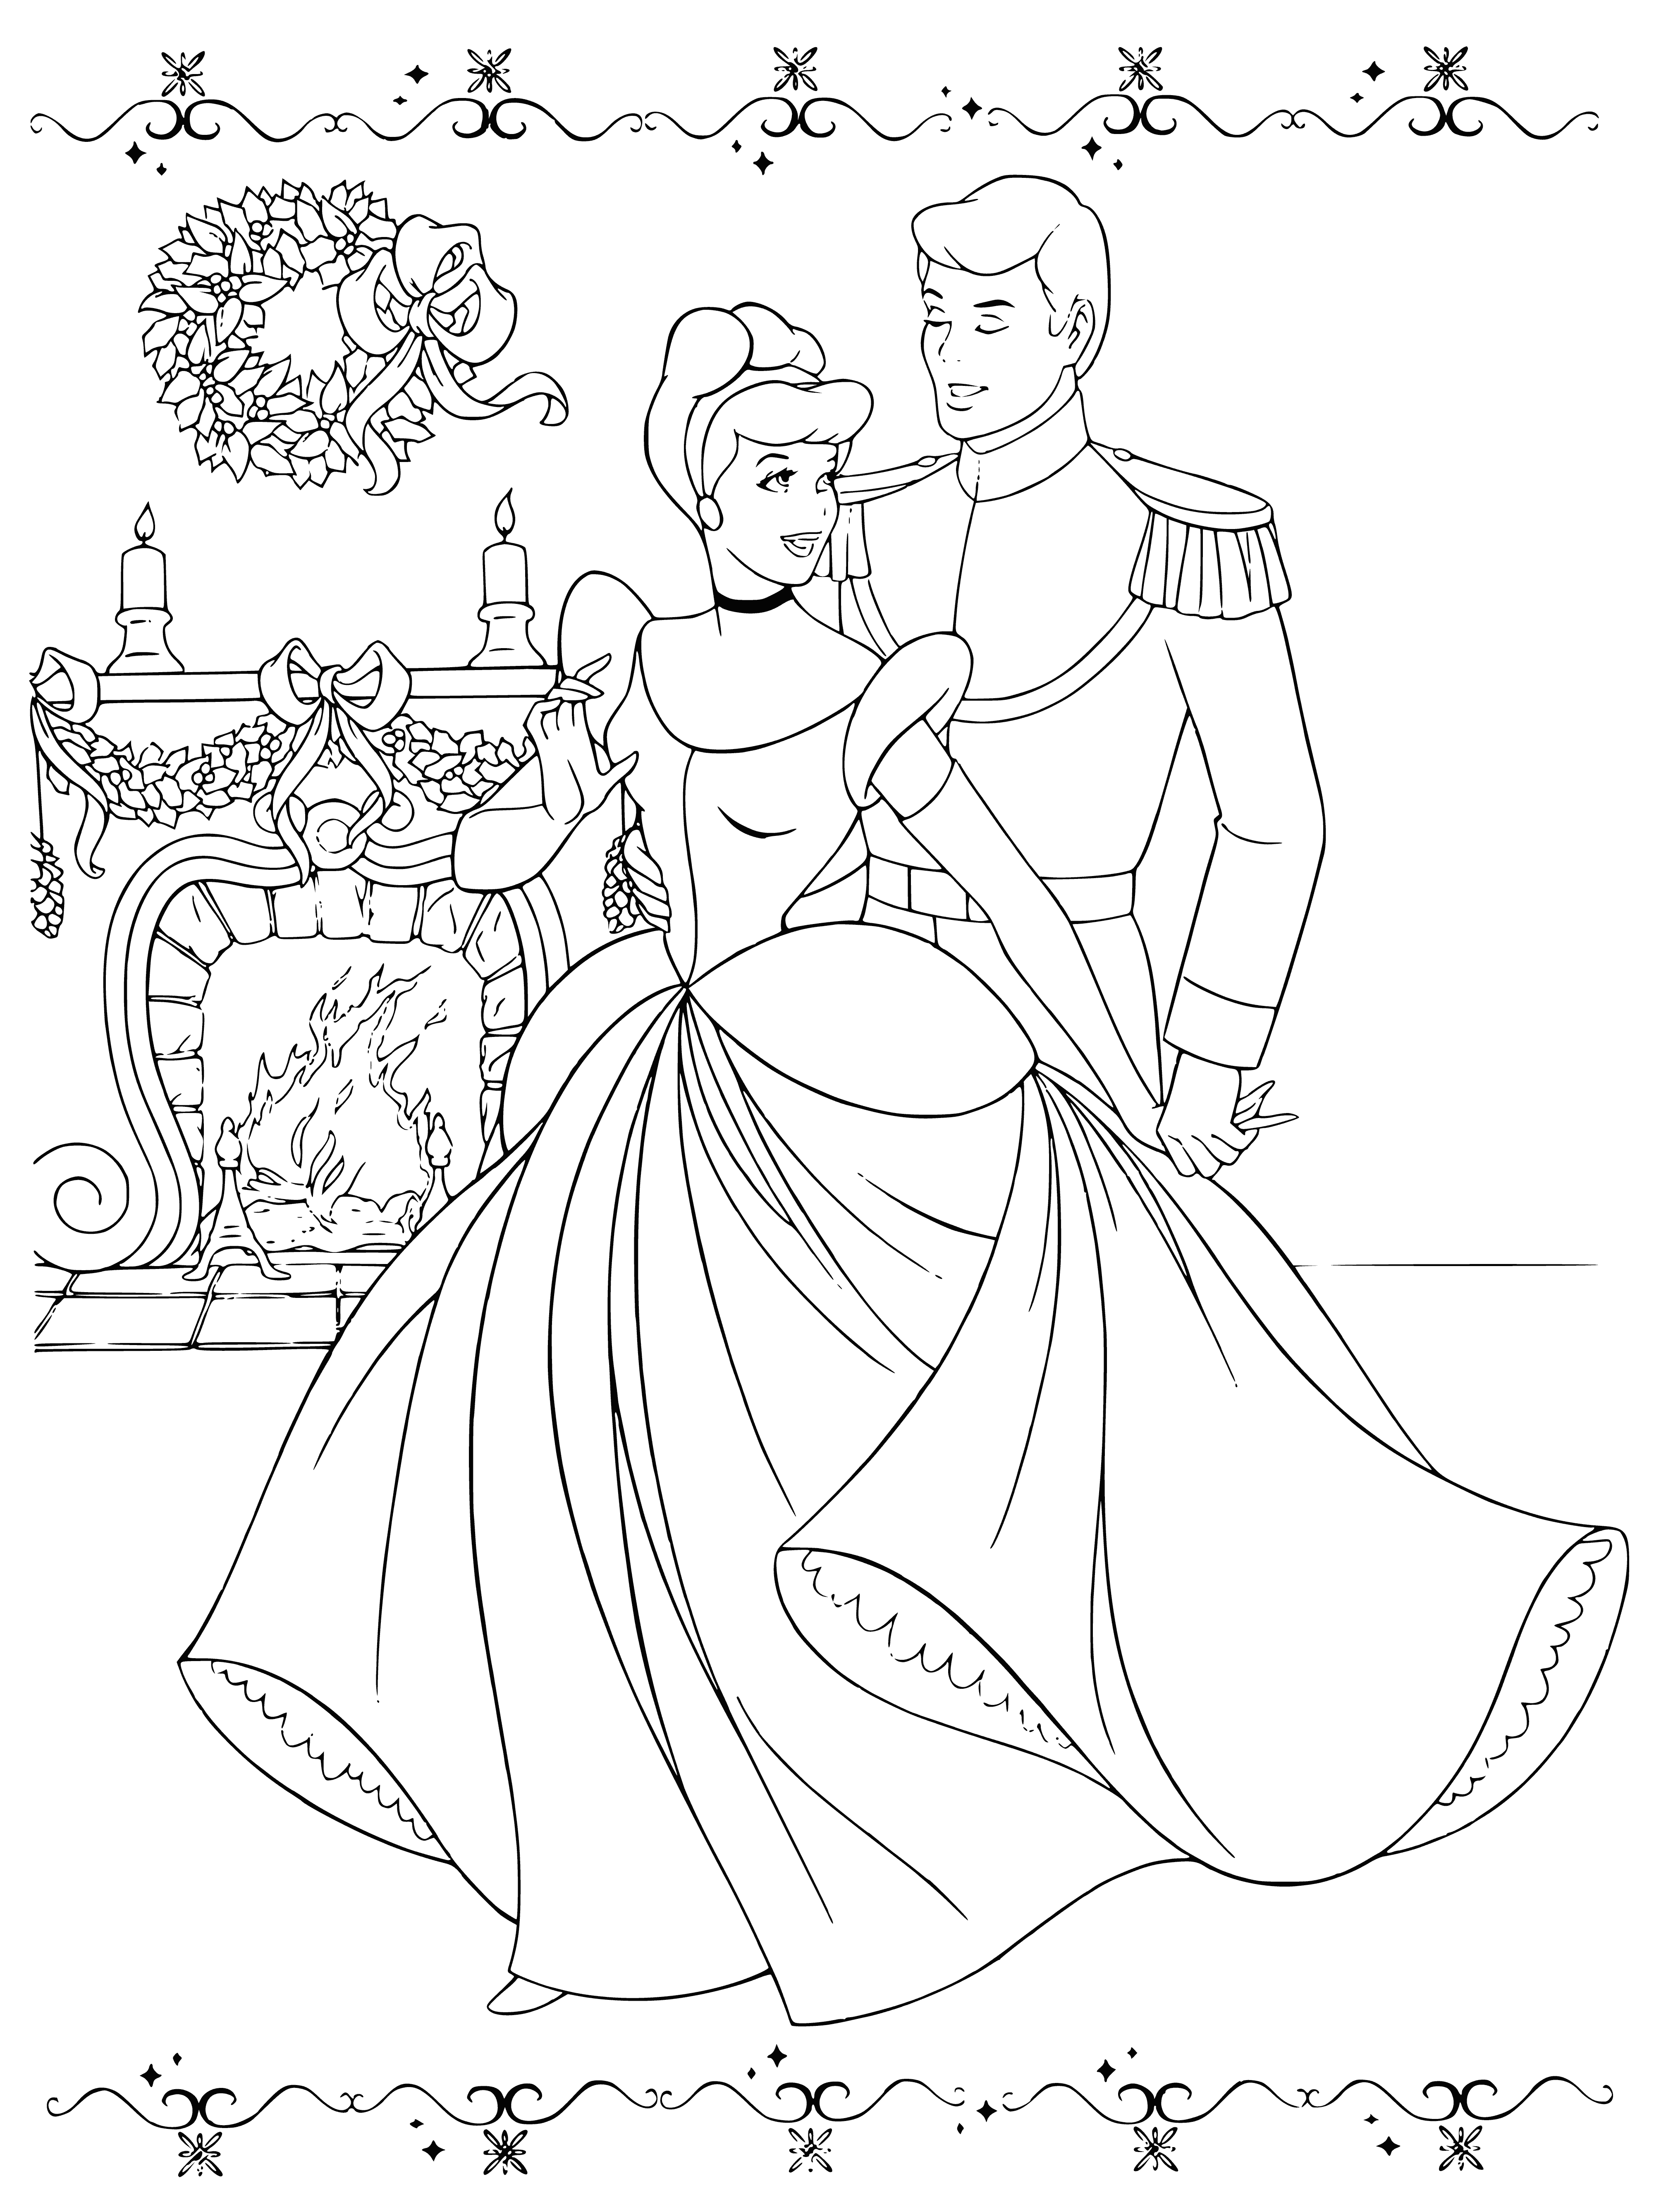 coloring page: Disney Princesses celebrate New Year's with masquerade ball - Cinderella & prince look happy with princesses in background enjoying festivities!